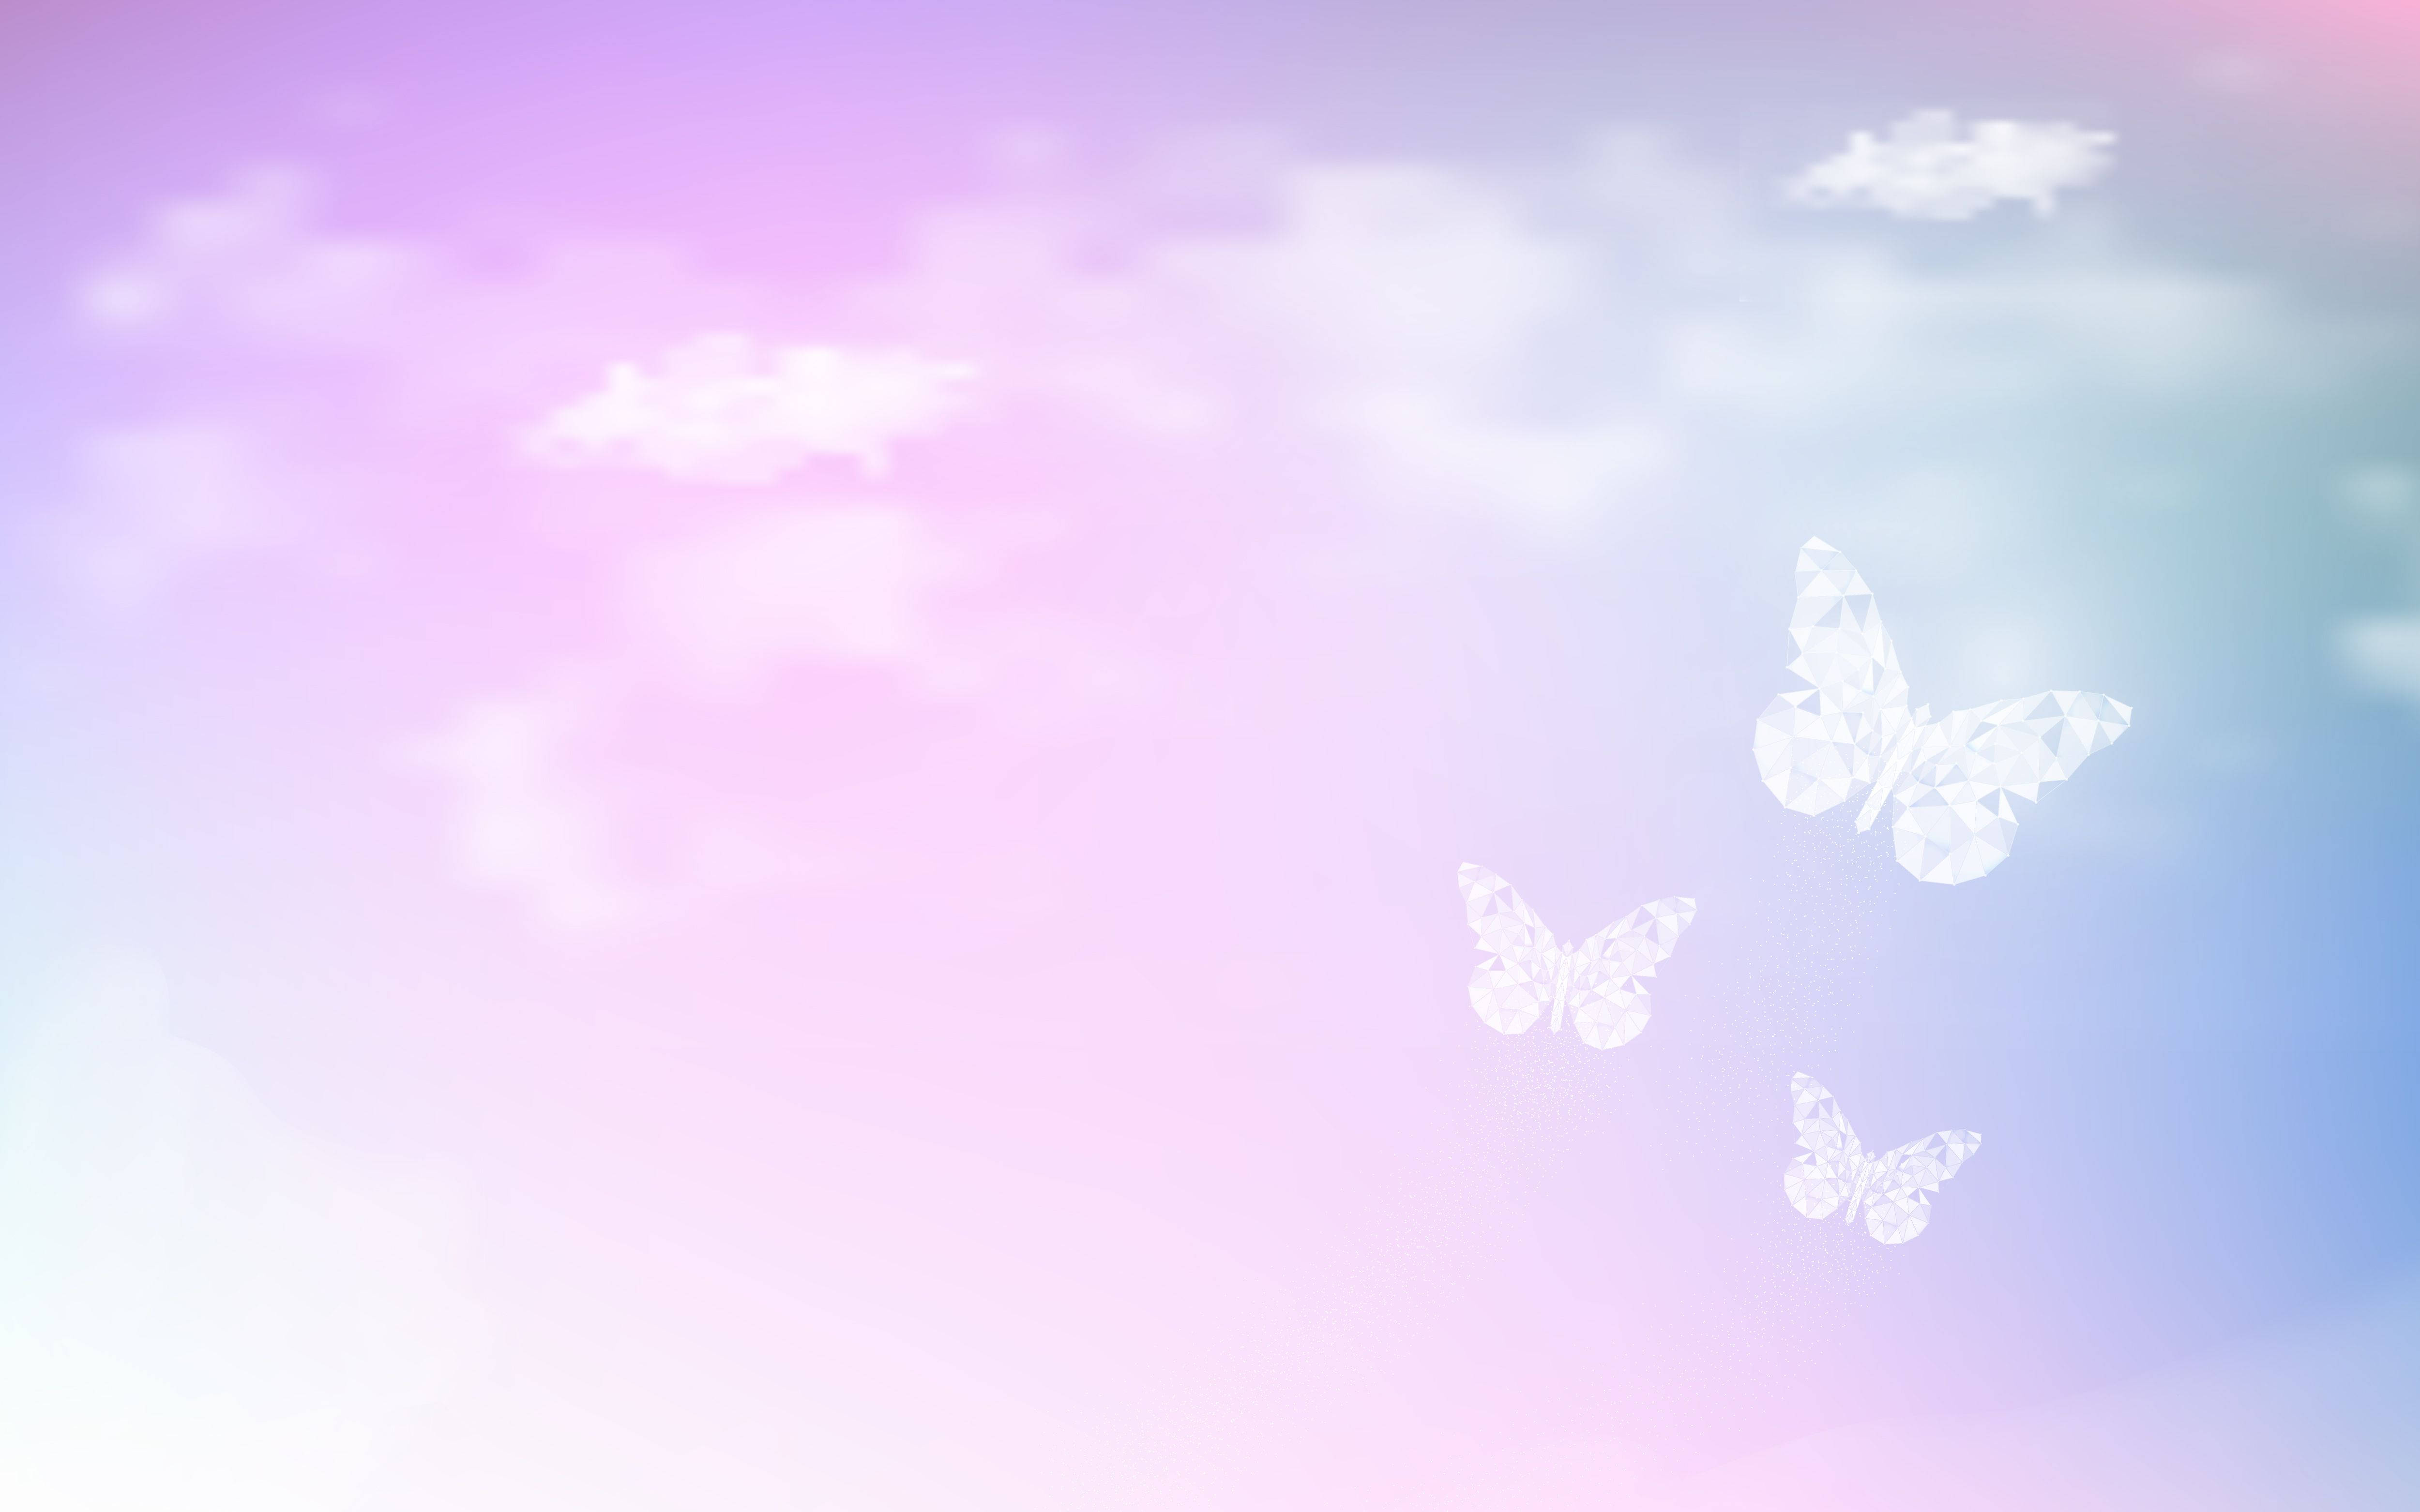 Captivating Allure Of The Pastel 4k Dreamy Sky Wallpaper